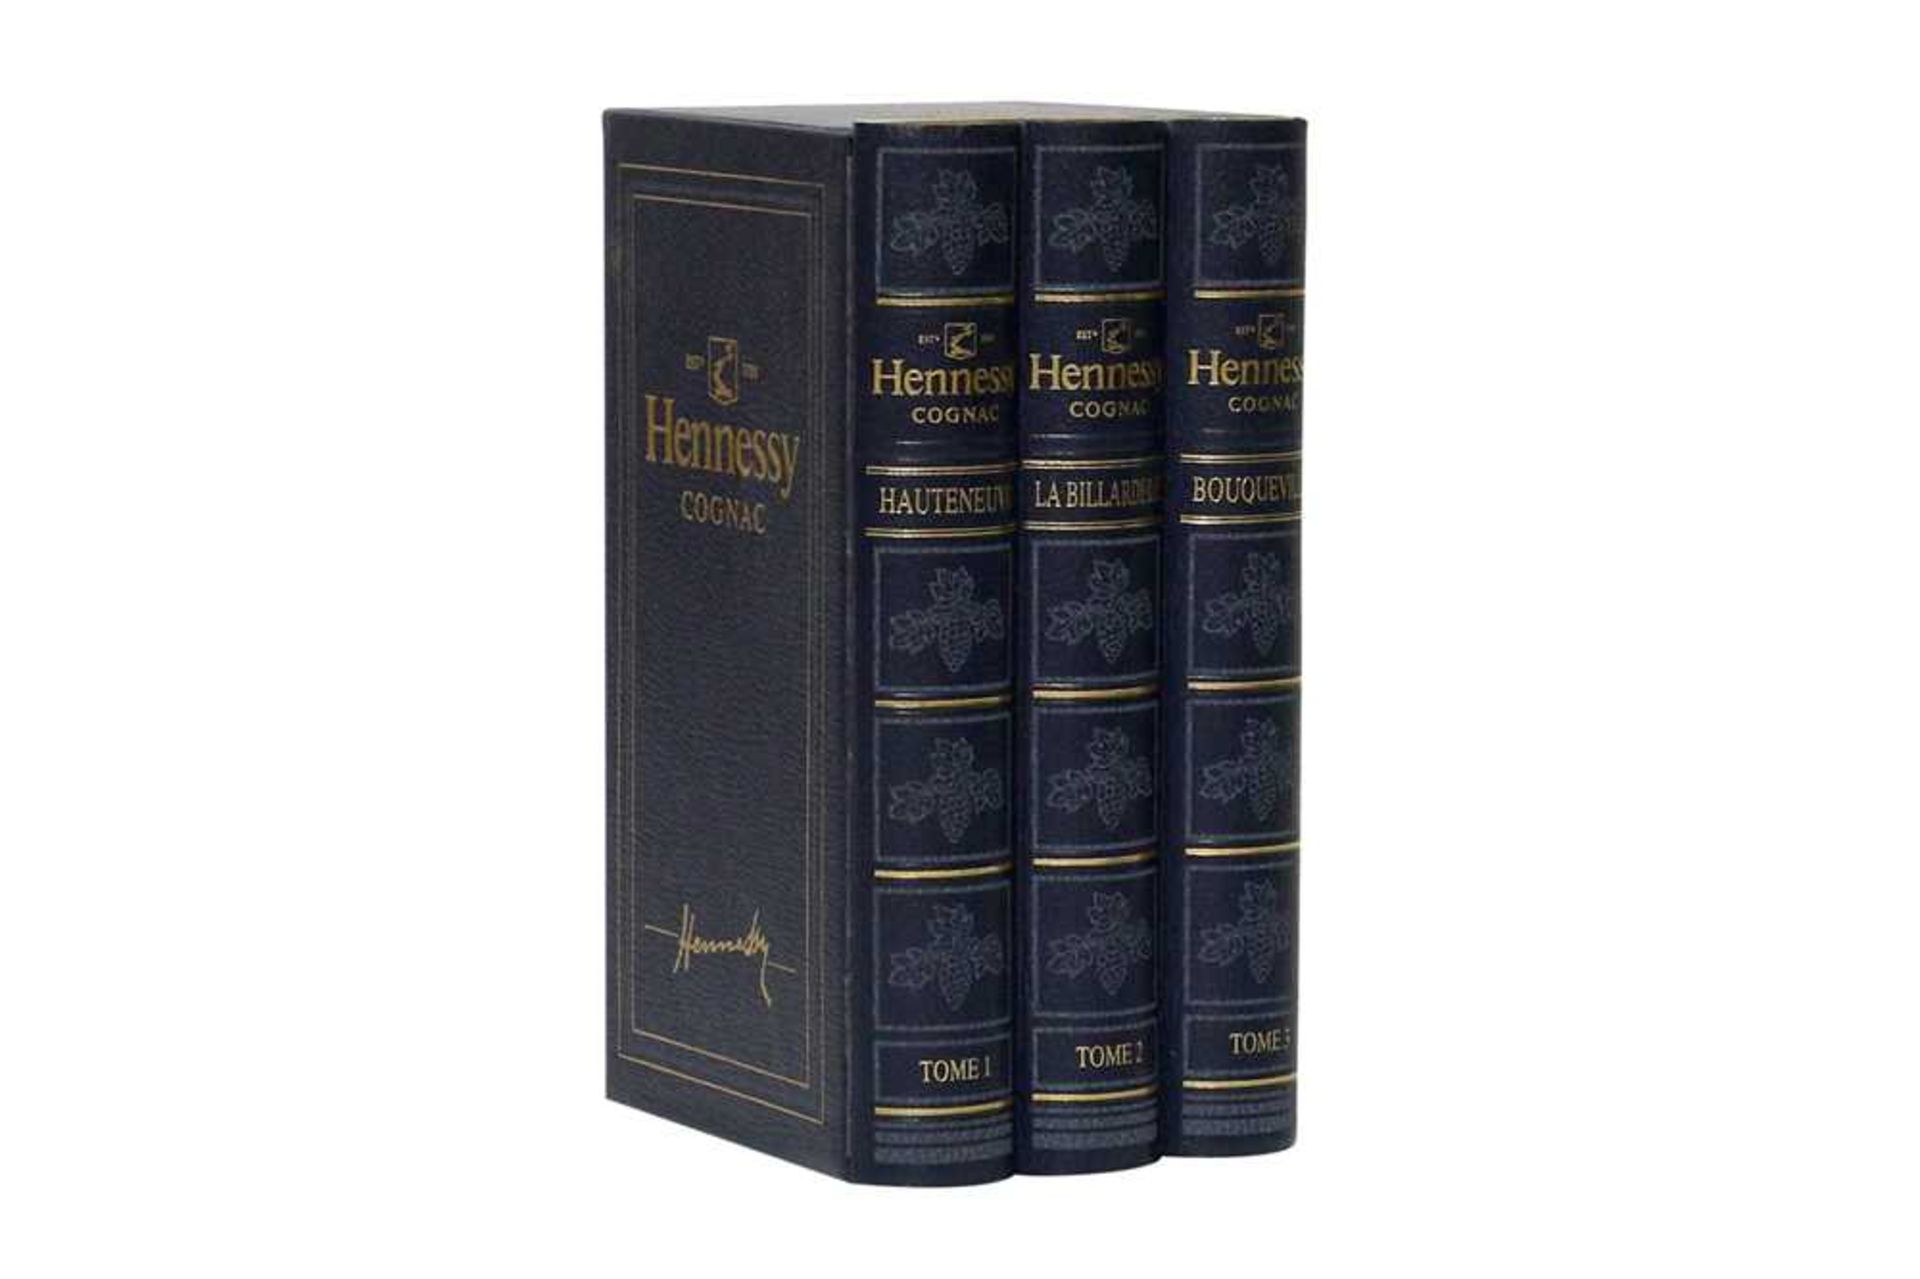 Hennessy, Cognac, Library Decanter, 40% vol, 70cl, one bottle in a book form case - Image 2 of 2